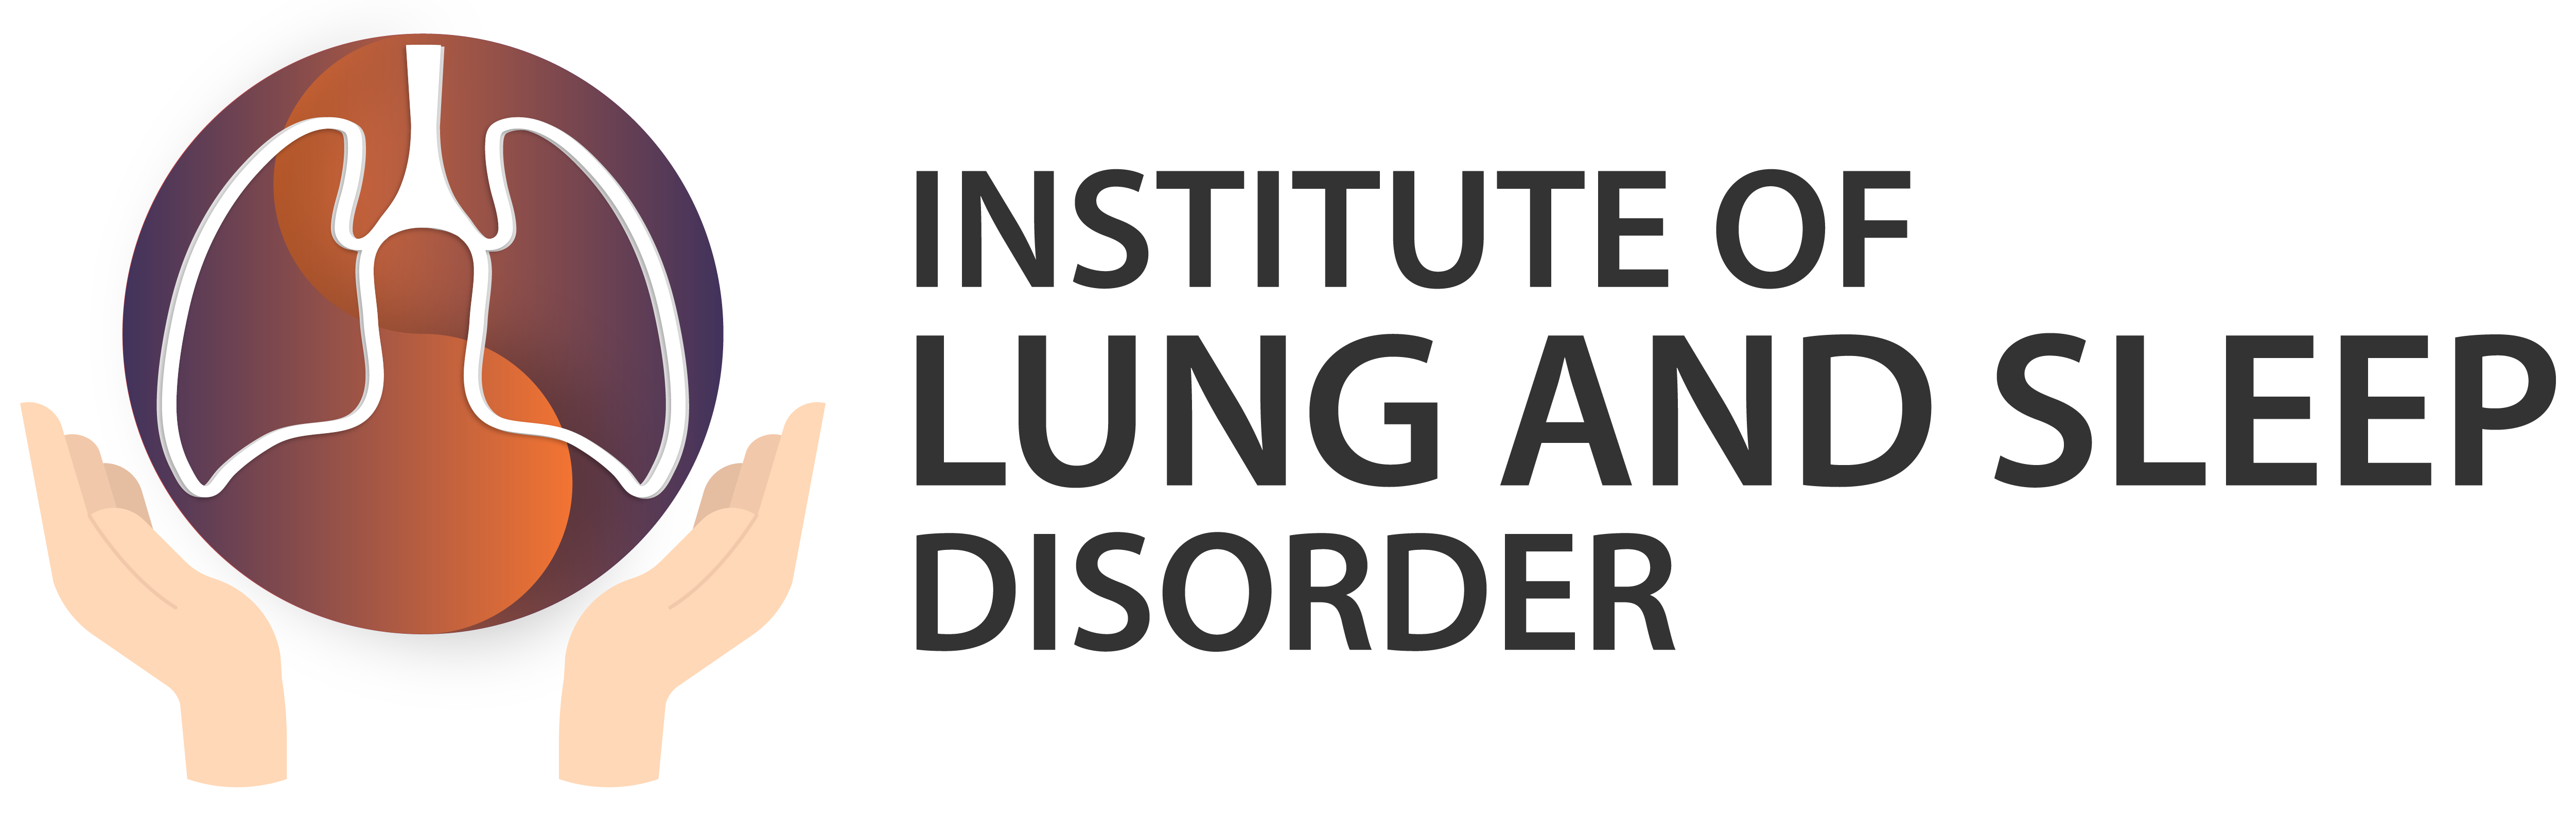 Institute of Lung and Sleep Disorder